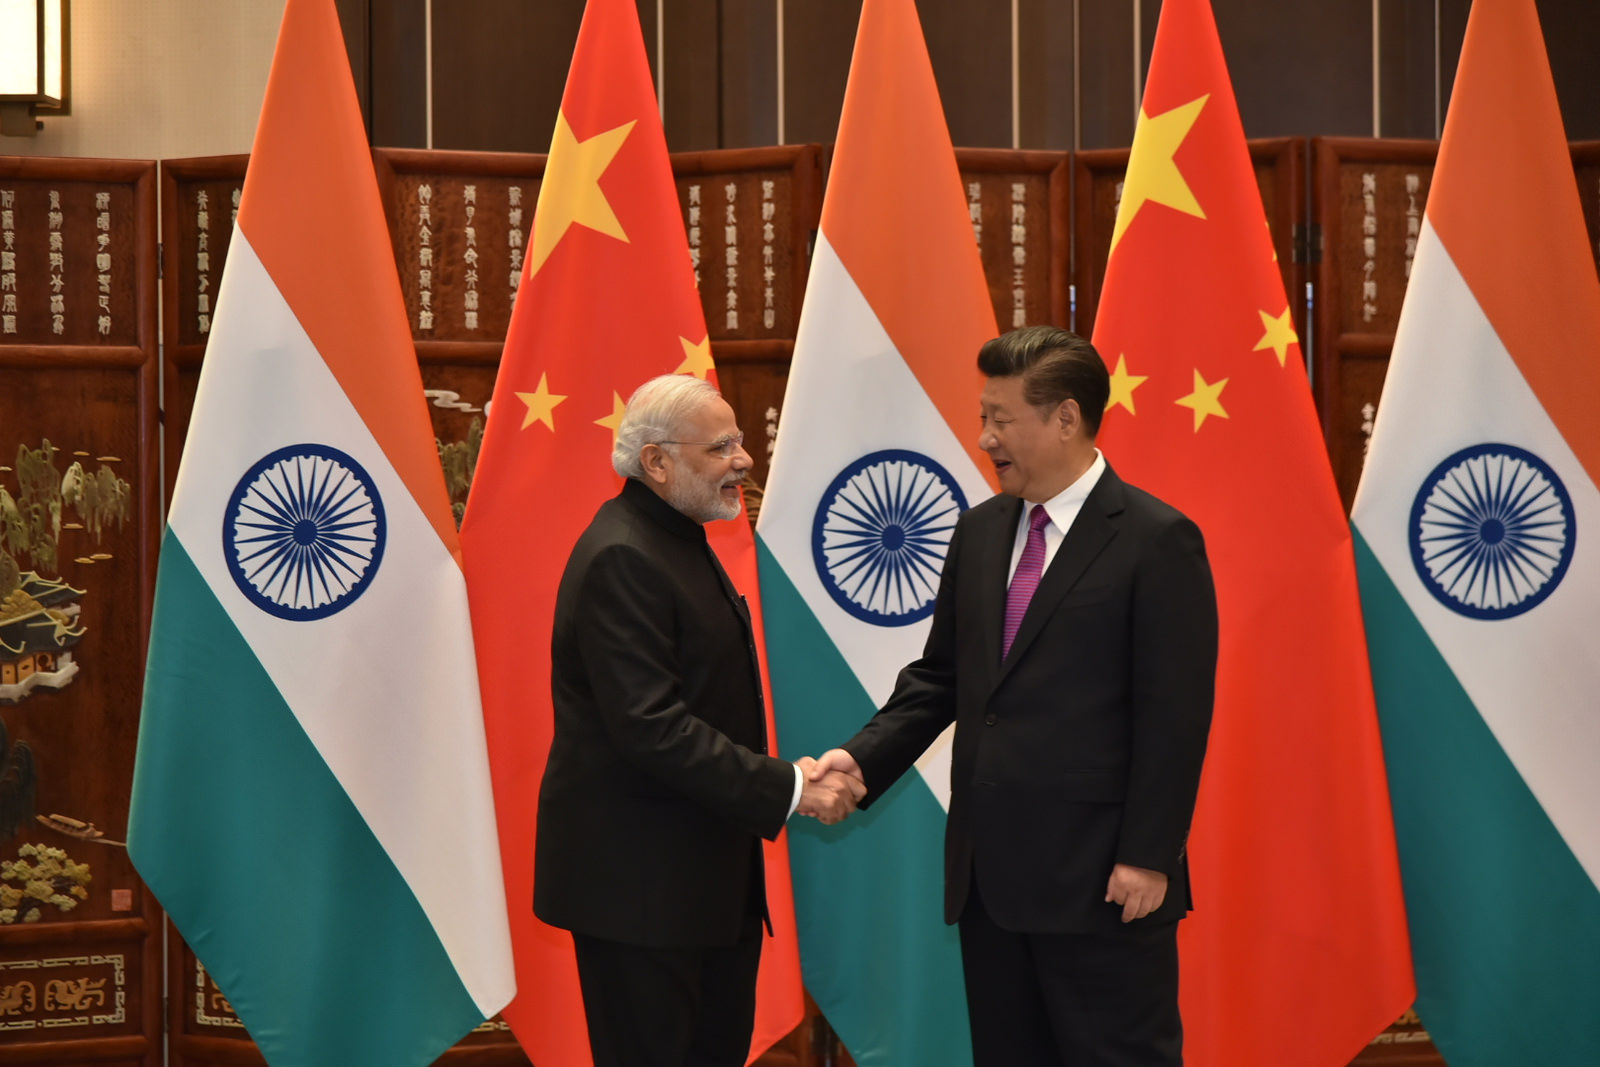 India-China border skirmishes and their impacts on bilateral relations GS: 2 "EMPOWER IAS"